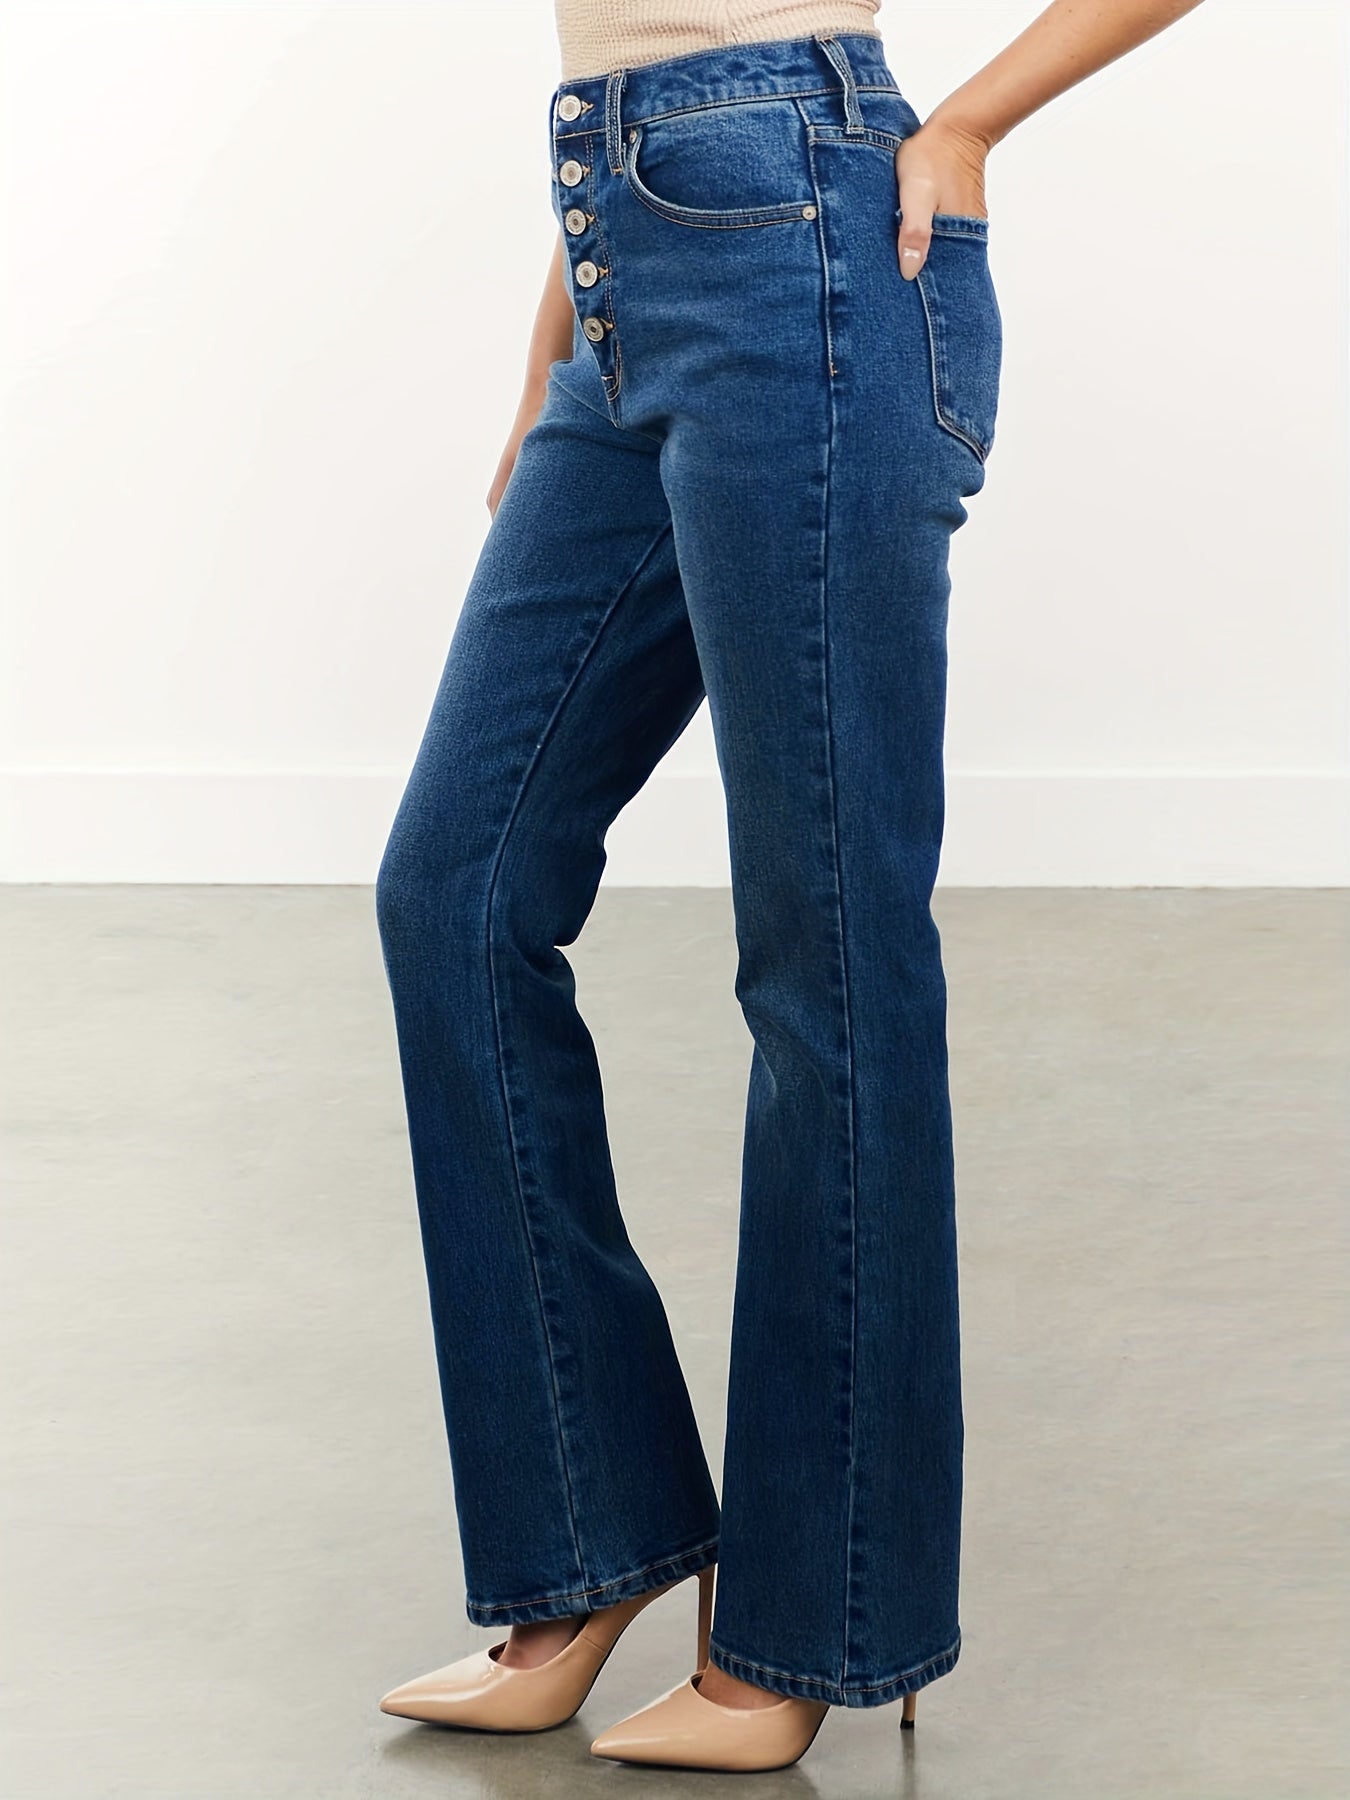 「lovevop」Single-breasted Mid Rise Bootcut Jeans, Whiskering High Strech Bell Bottoms Denim Pants, Elegant Pants For Every Day, Women's Denim Jeans & Clothing